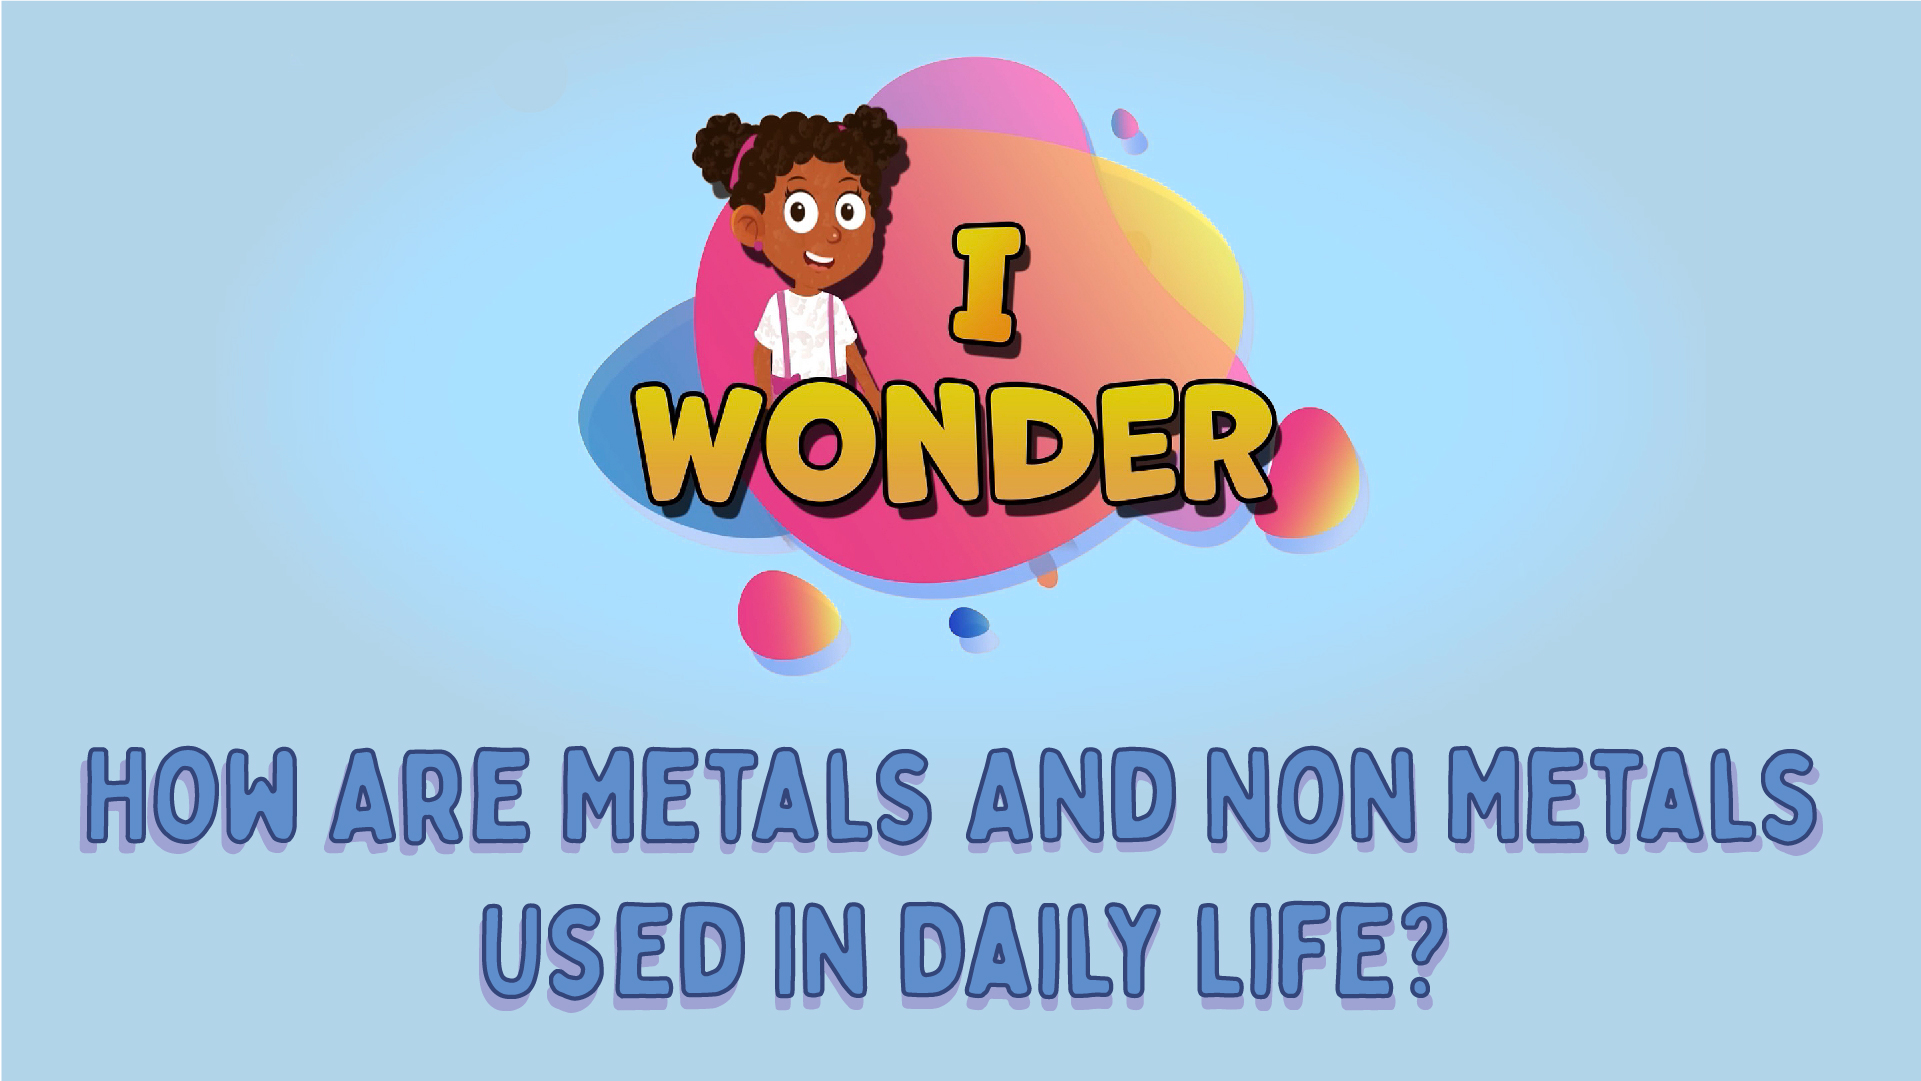 How Are Metals And Non Metals Used In Daily Life?